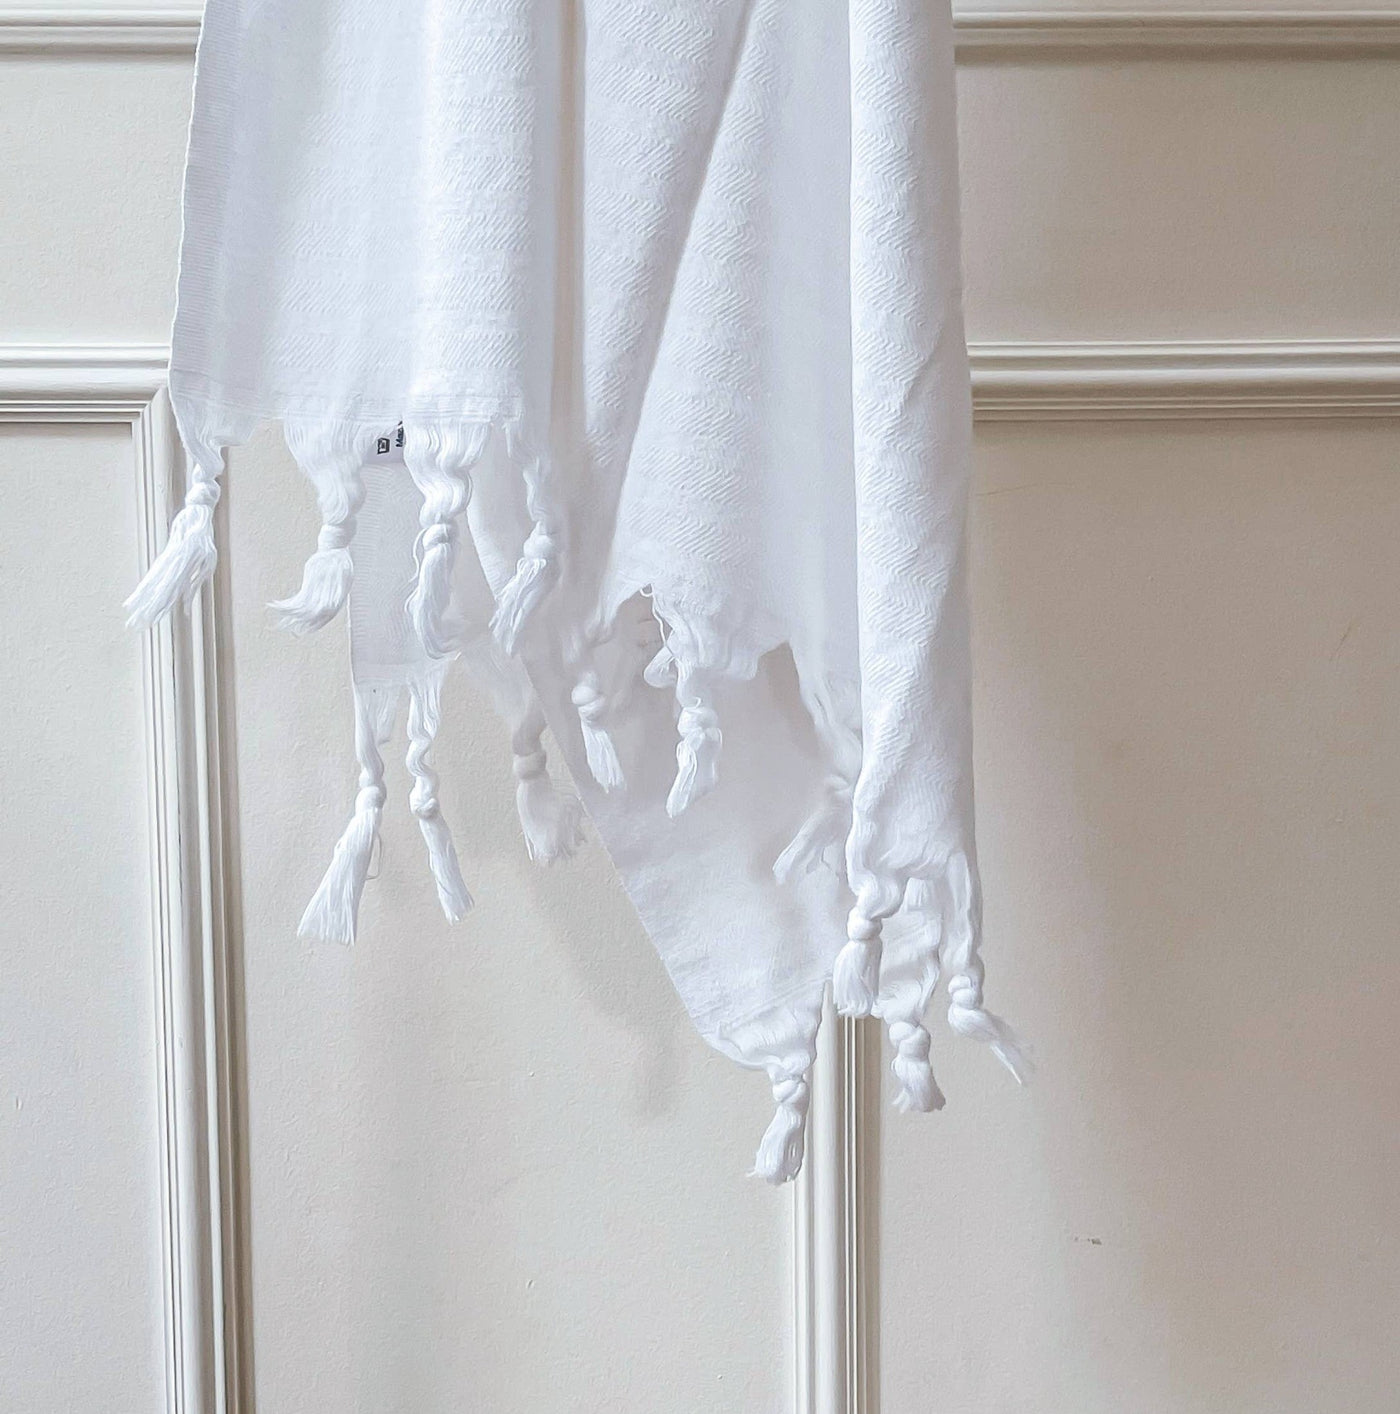 Timeless Turkish Hand Towel: in white color with knotted fringe. Made with the finest 100% cotton by talented artisans.  Highly absorbent, luxuriously soft and beautiful.